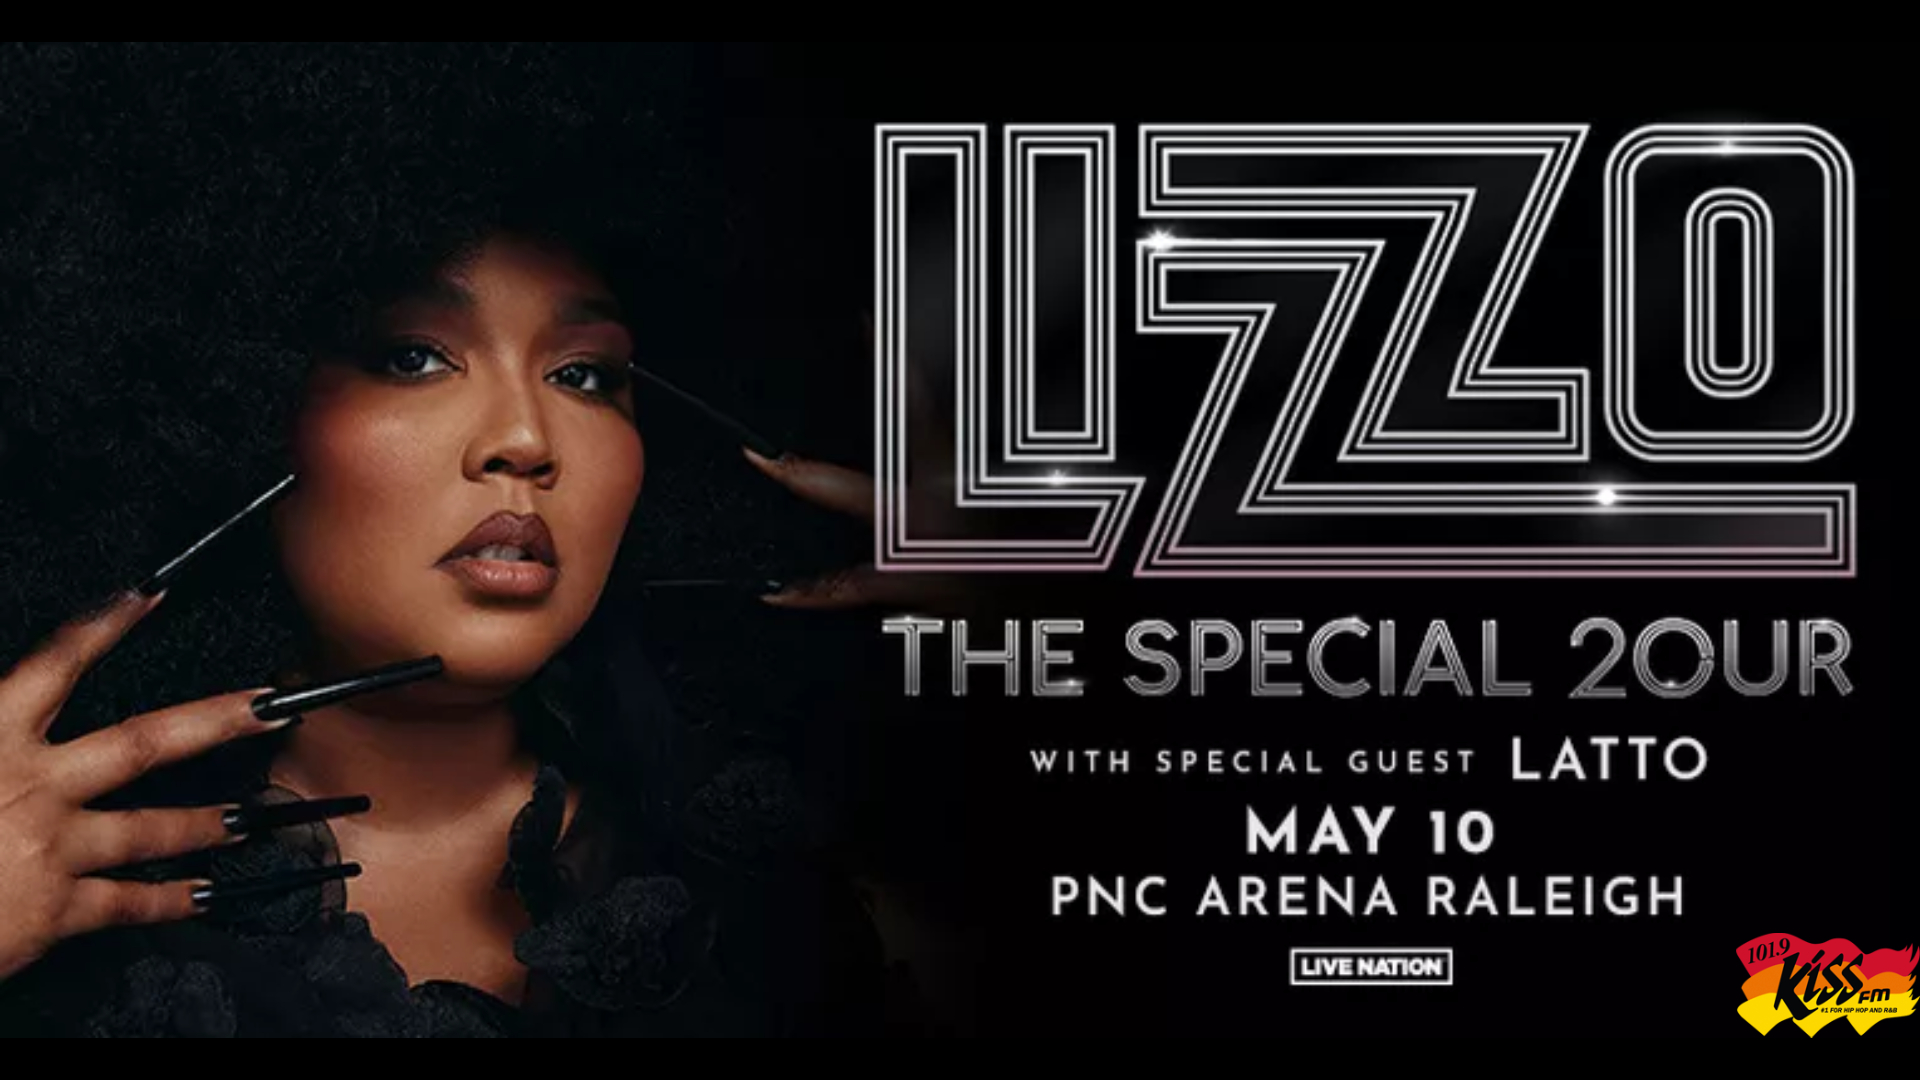 Lizzo: The Special 2our w/ Special Guest LATTO